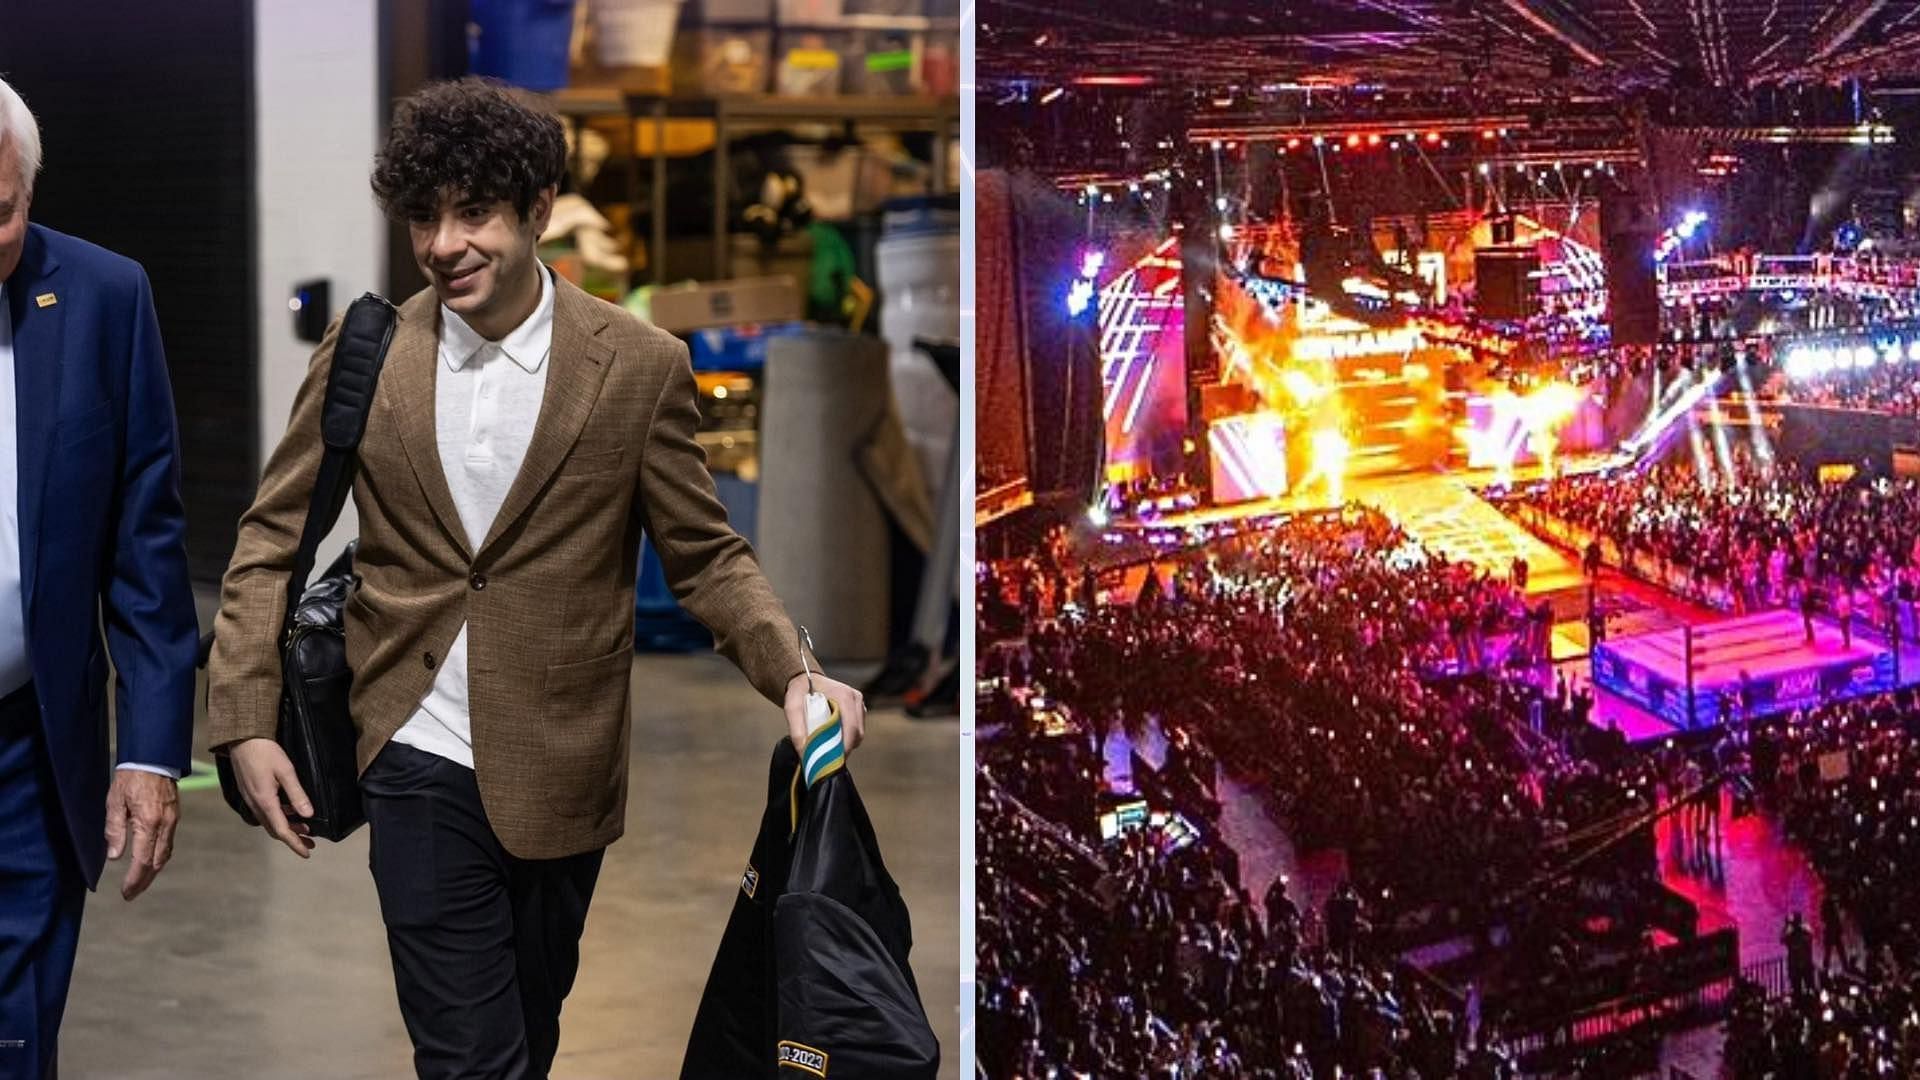 Tony Khan is the president of All Elite Wrestling [Photo courtesy of Tony Khan and AEW